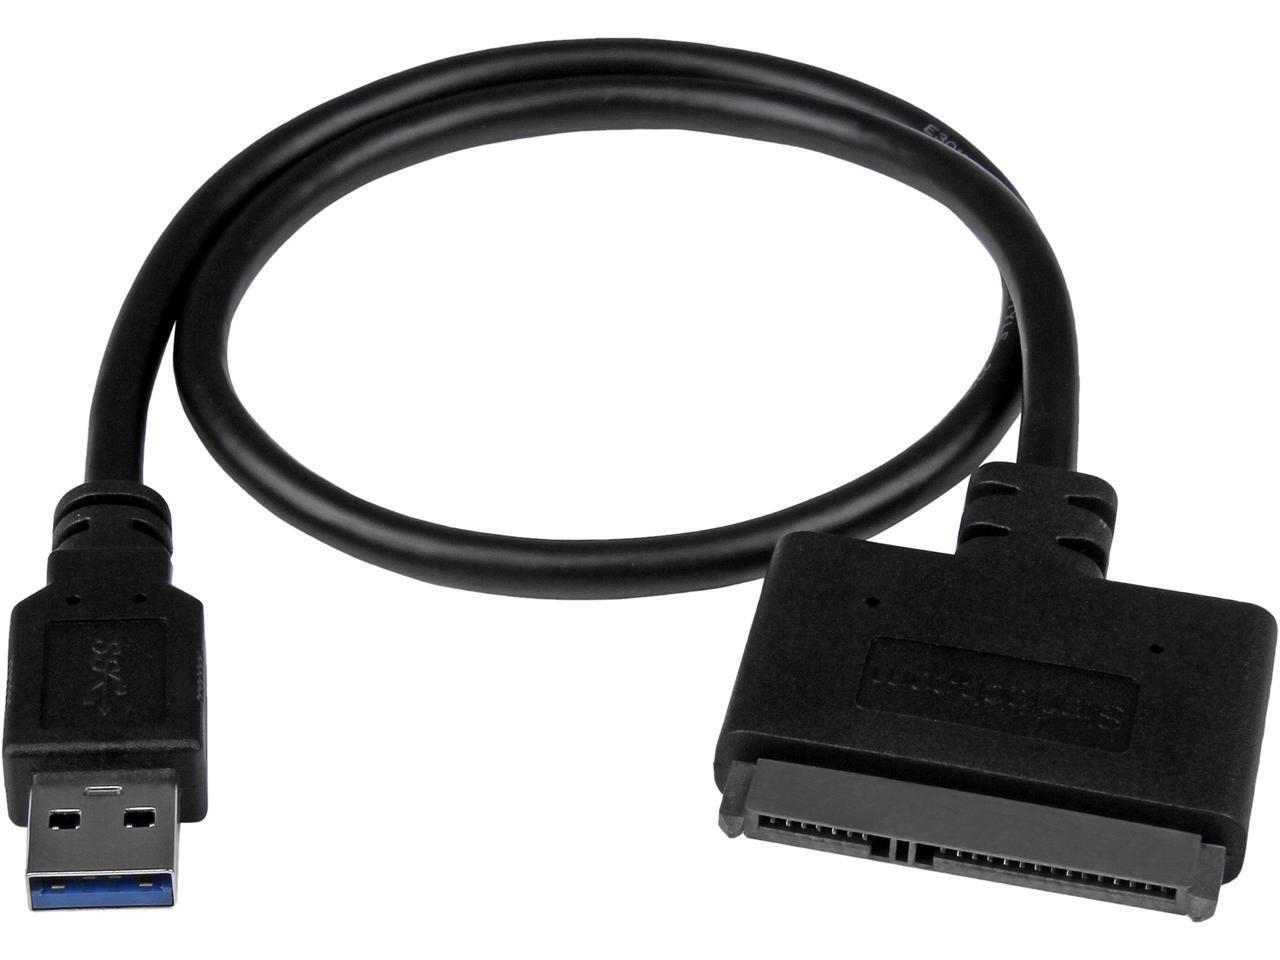 StarTech.com USB312SAT3CB USB 3.1 (10Gbps) Adapter Cable for 2.5